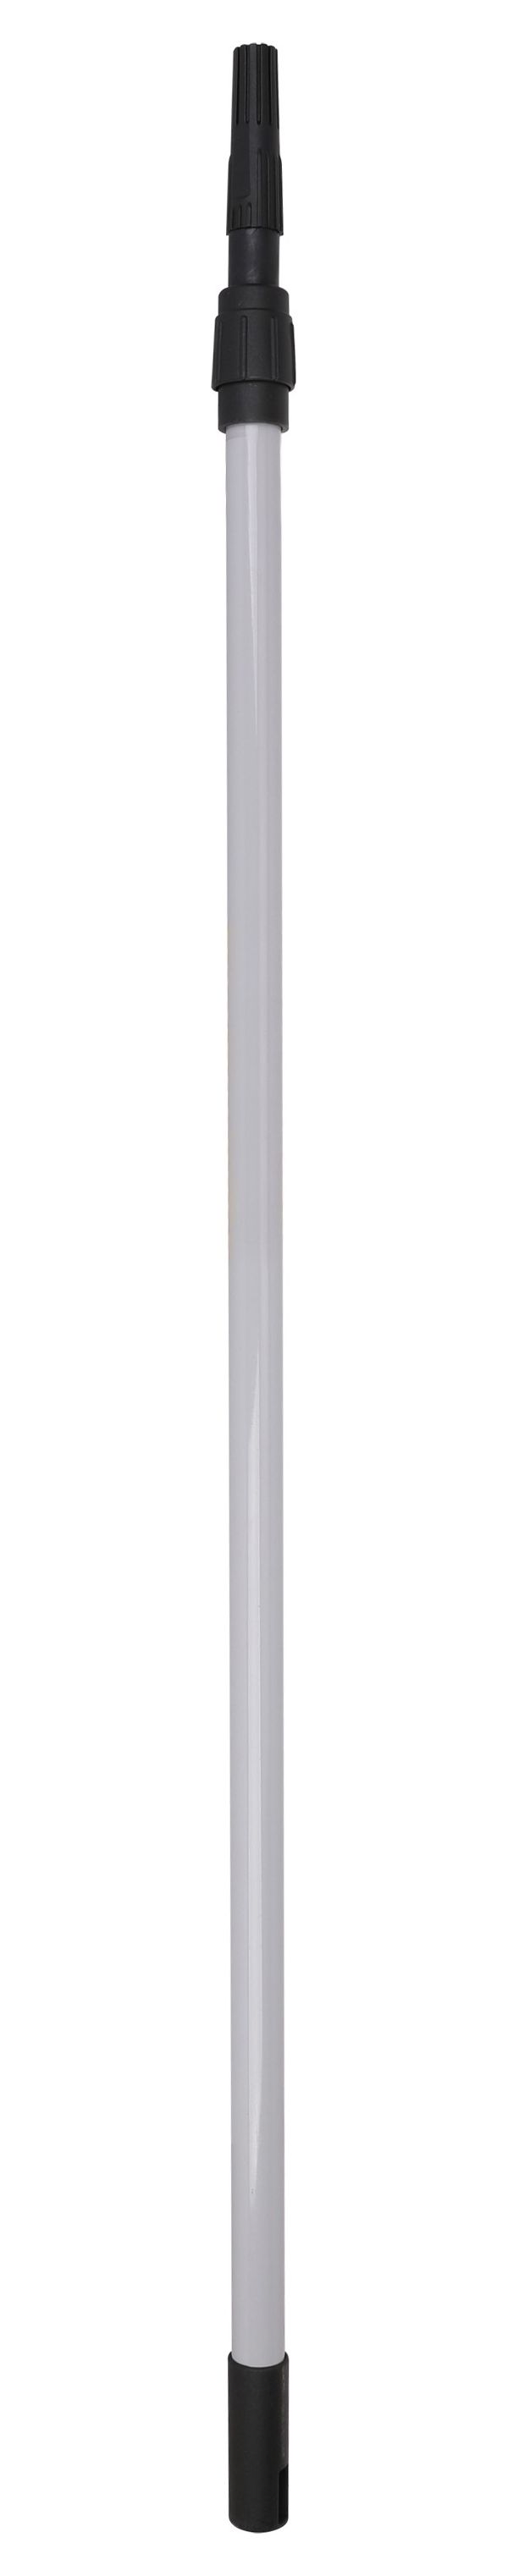 Image of Telescopic Roller Extension Pole - 1 to 2m